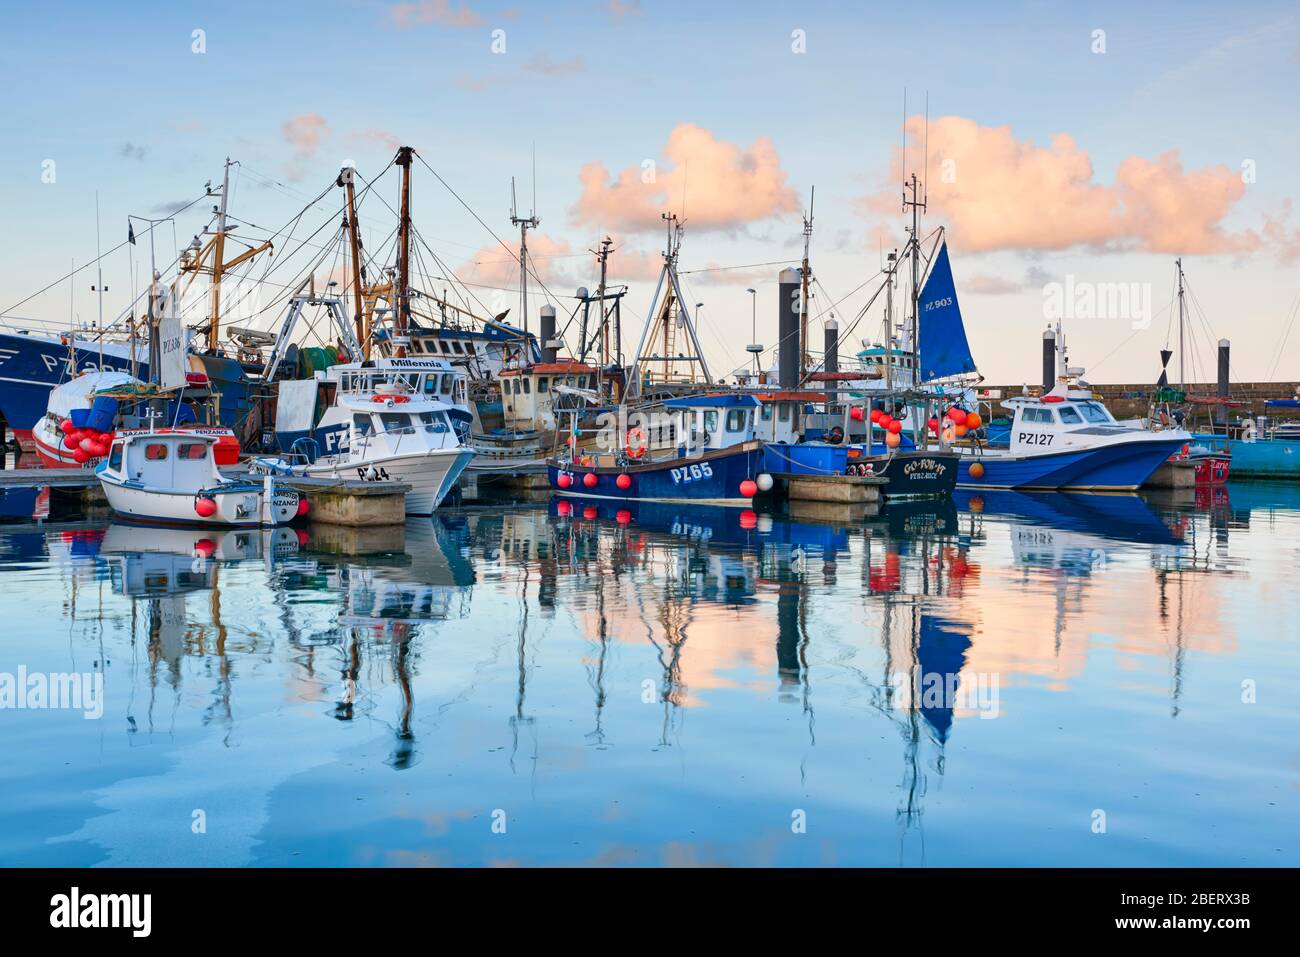 Calm evening overlooking the fishing boats at Newlyn Harbour Stock Photo